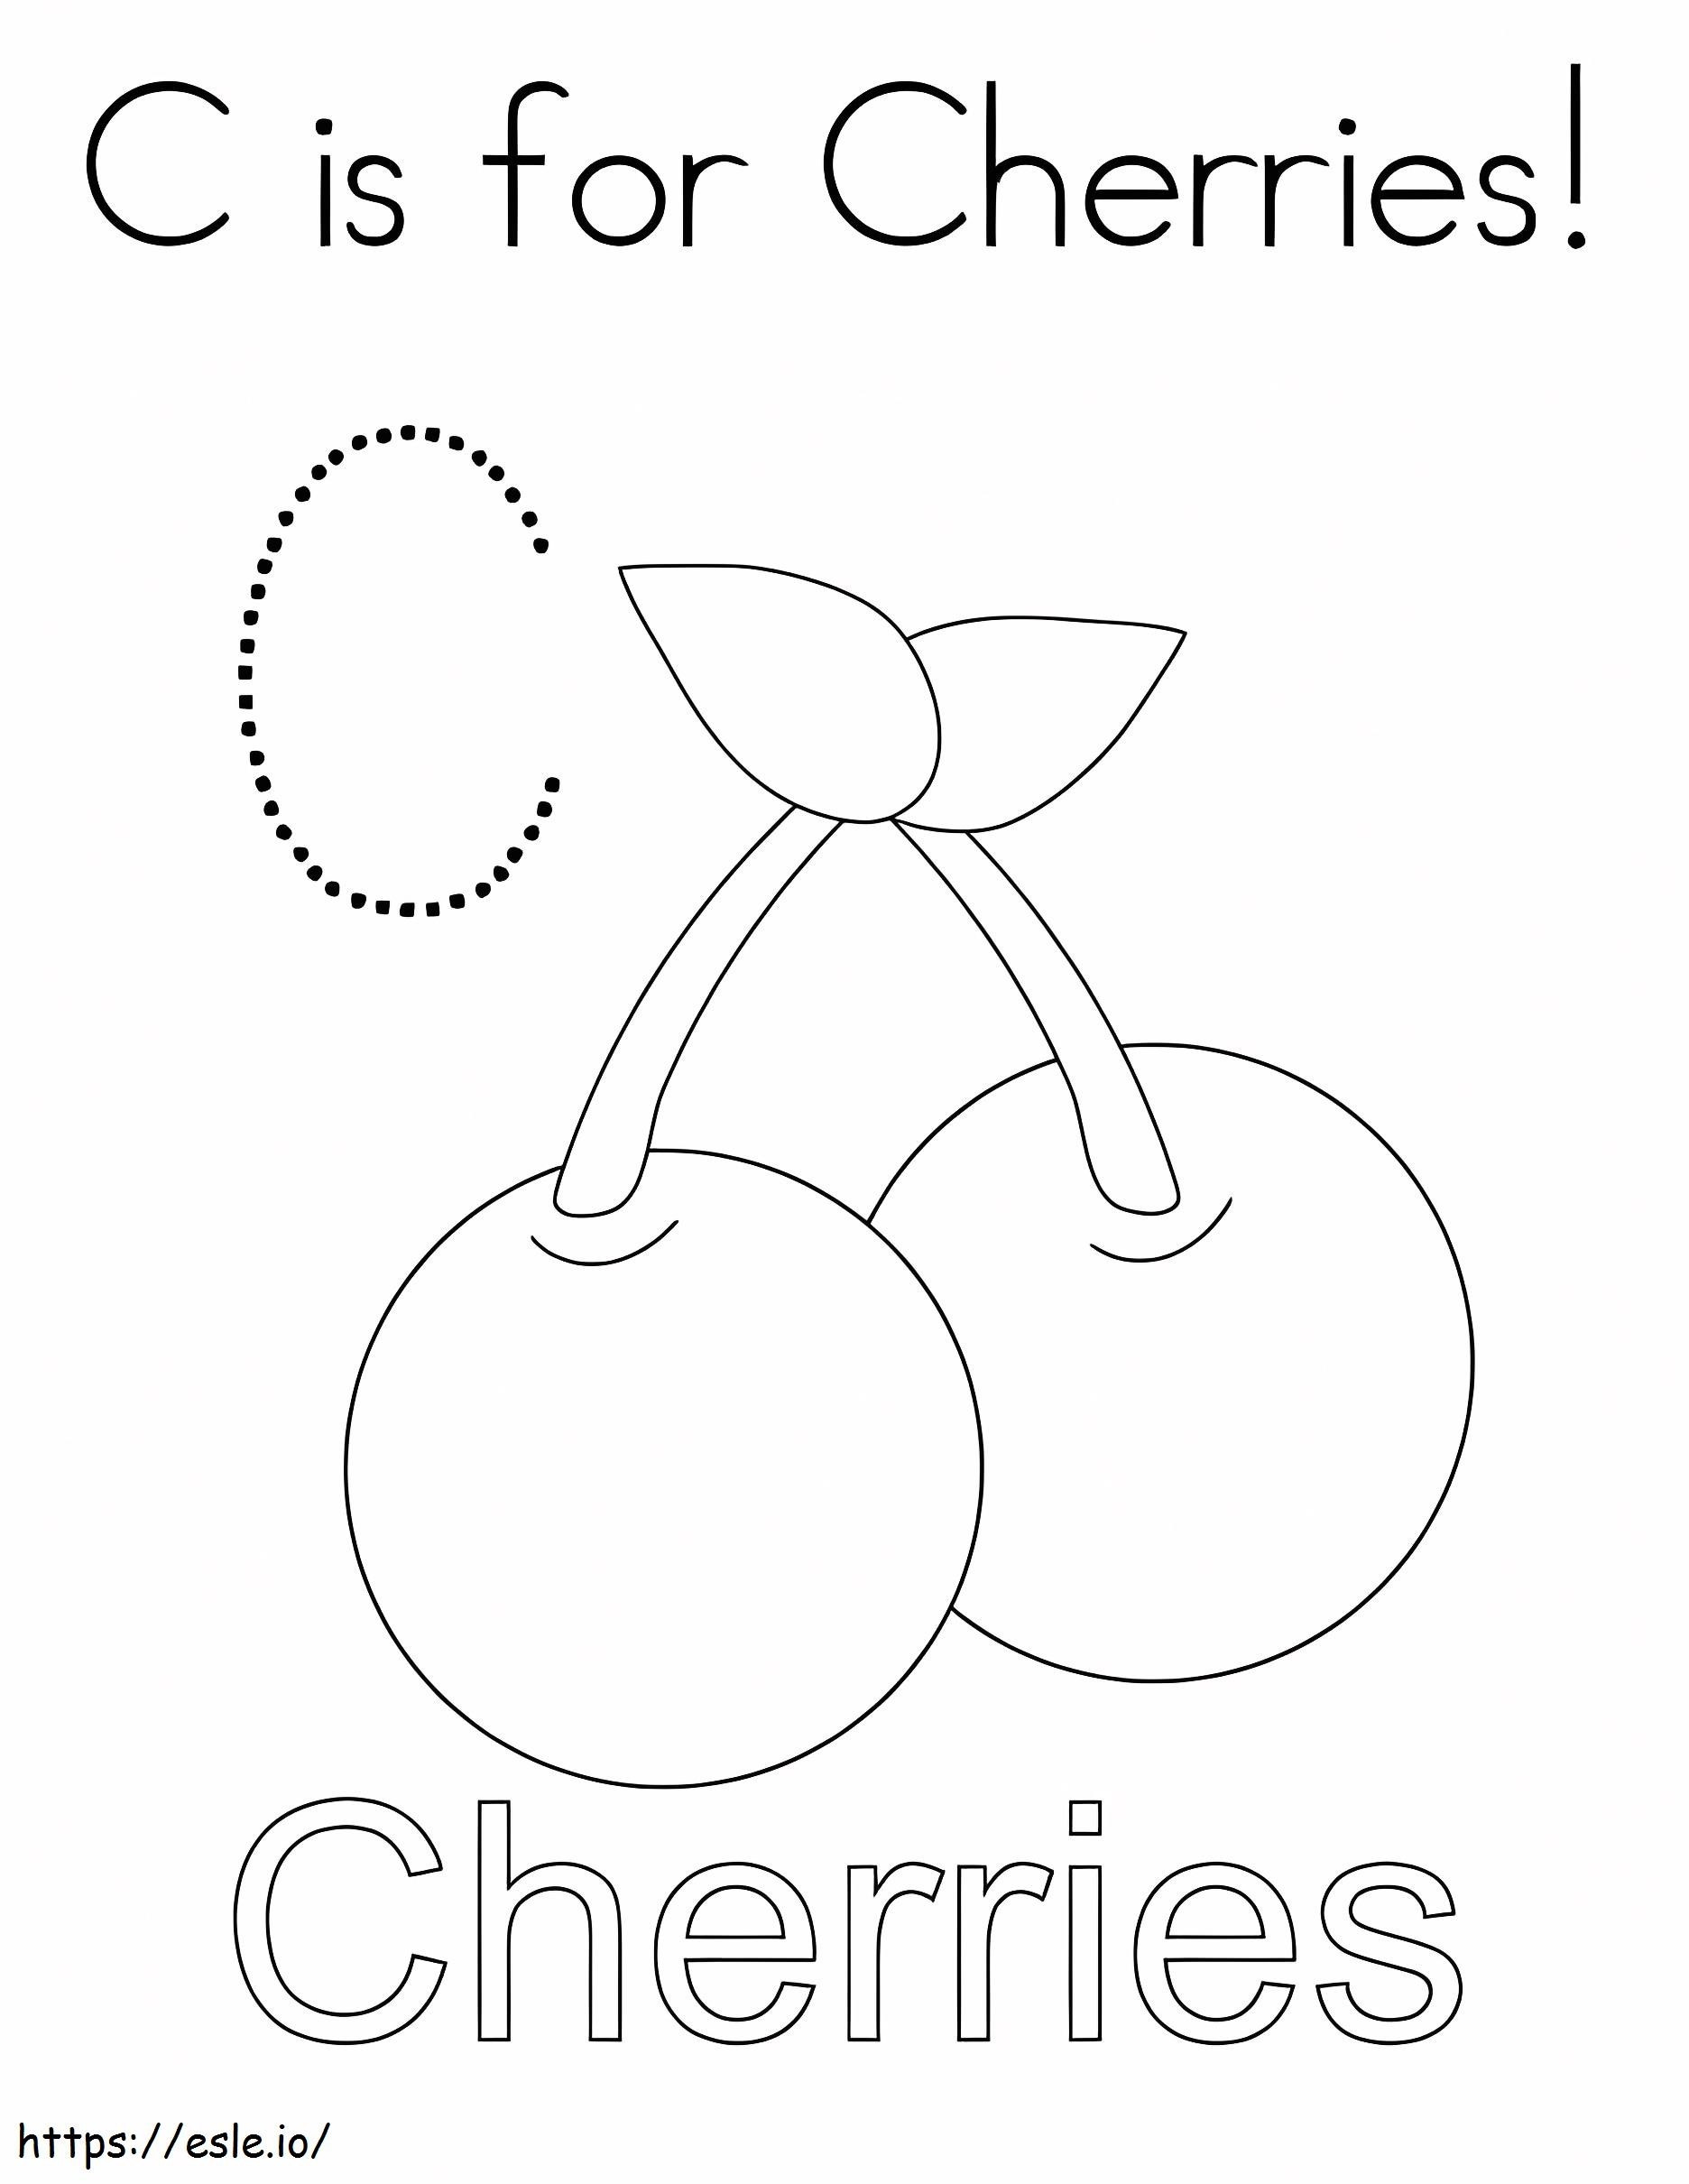 C Is For Cherries coloring page